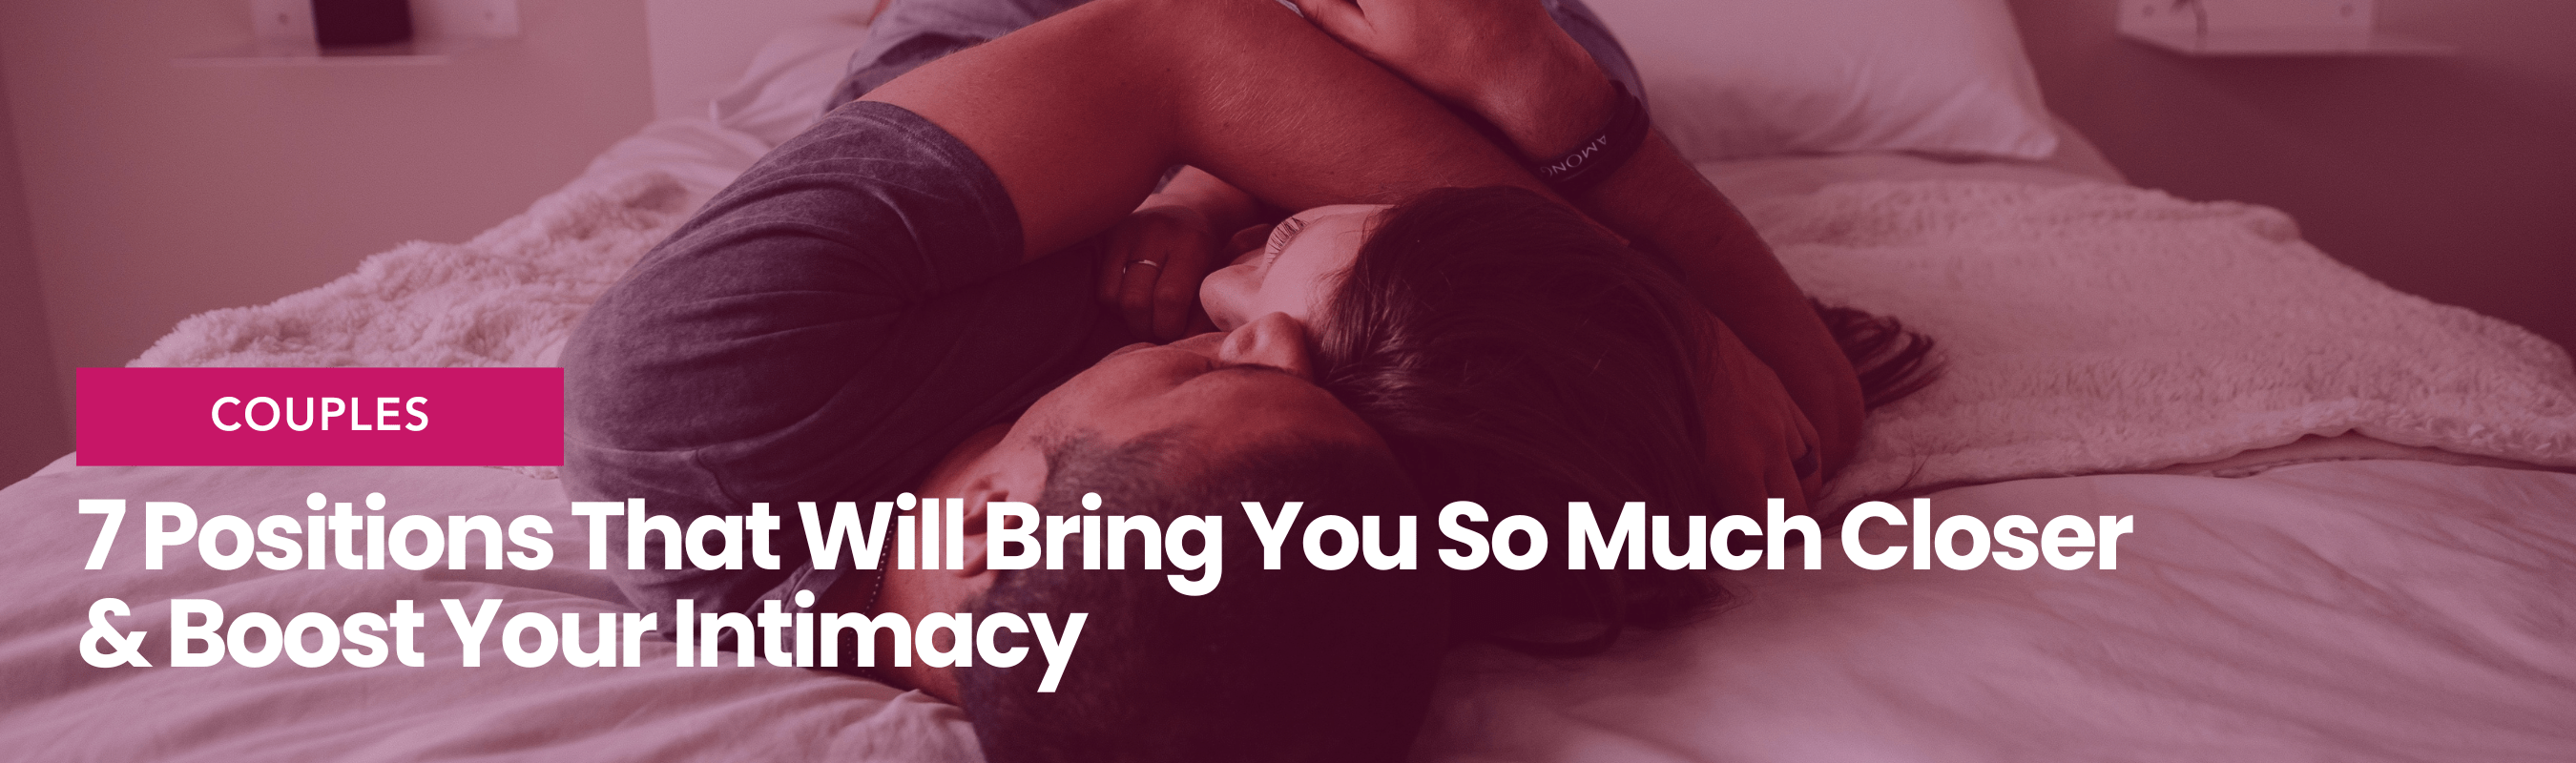 7 Positions That Will Bring You So Much Closer  & Boost Your Intimacy